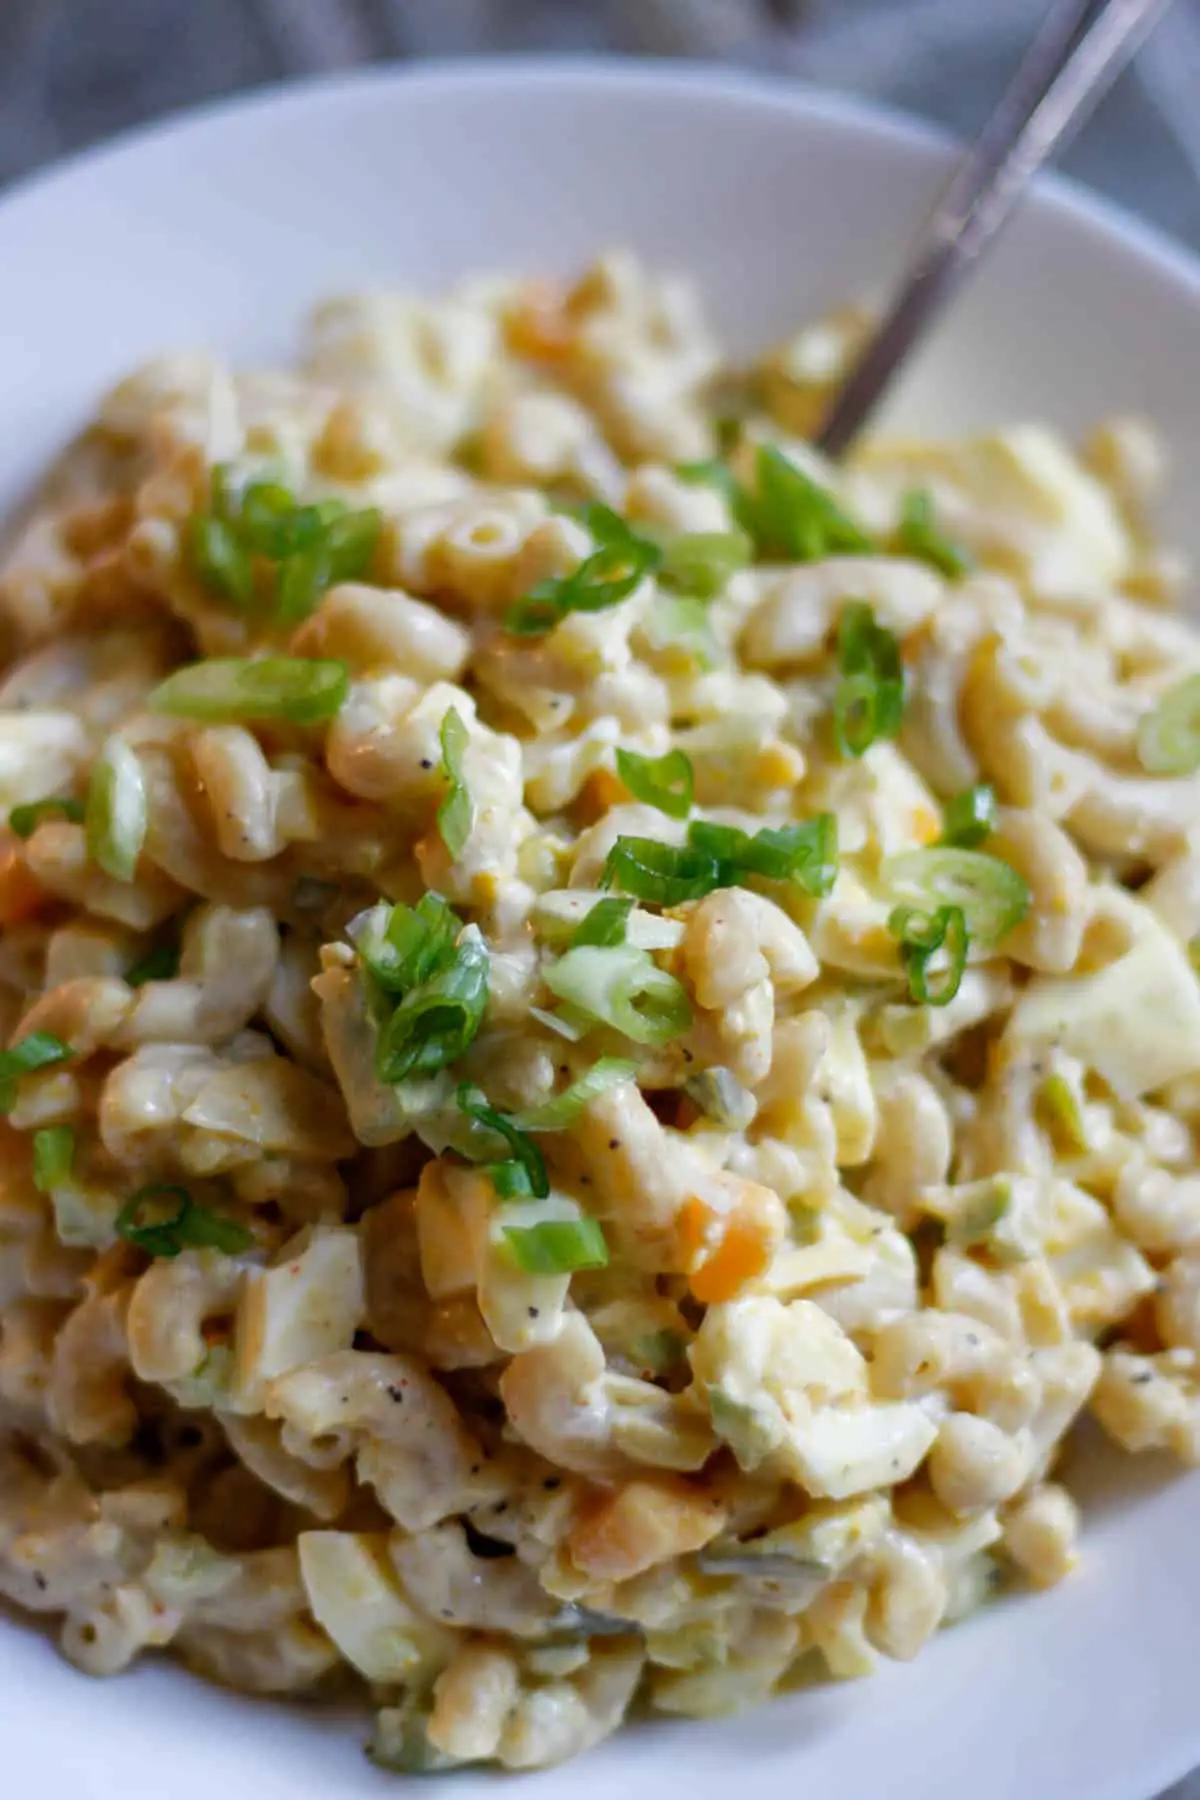 Creamy macaroni salad with chopped hard boiled eggs and green peppers garnished with green onion slices in a white bowl with the stem of a spoon pictured at the top right.